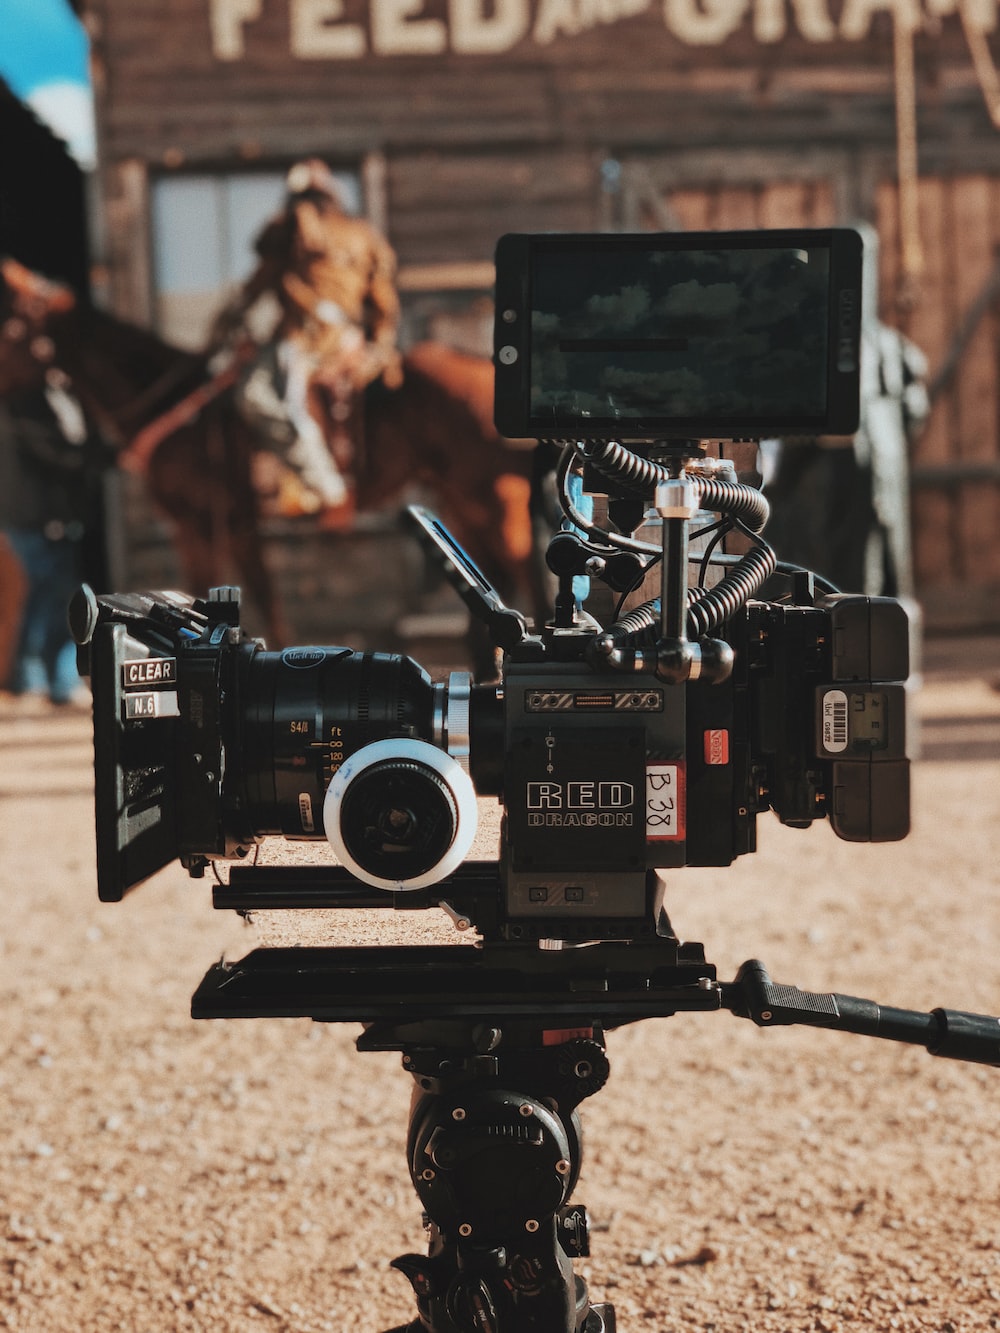 Filmmaking Equipment Picture. Download Free Image